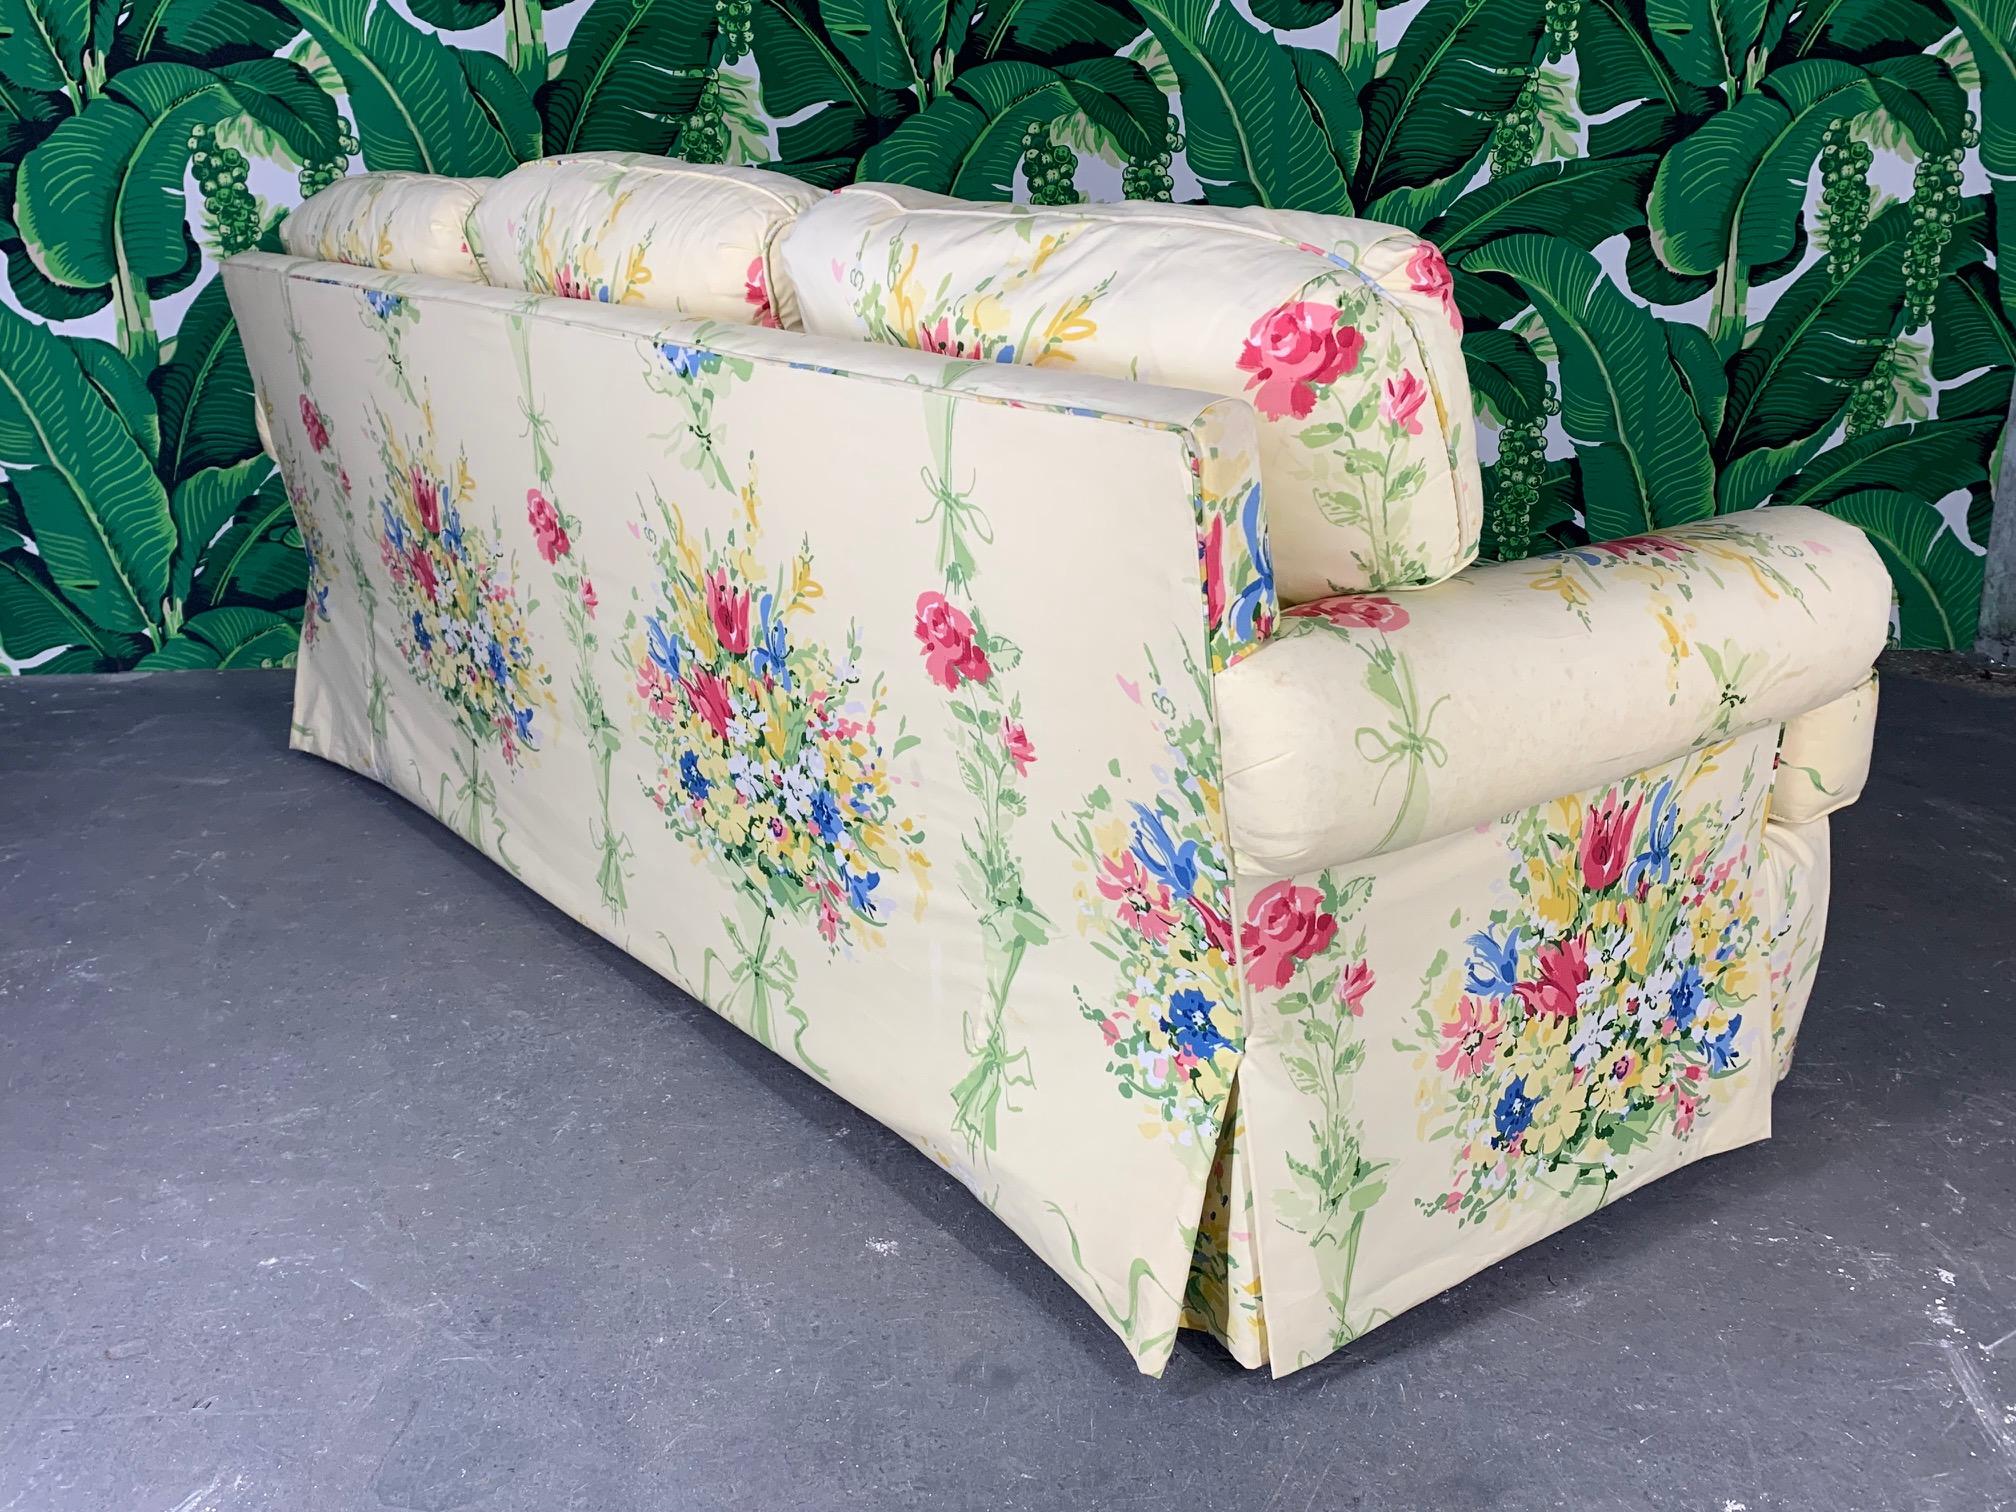 Fabulous floral print sofa by Sherrill Furniture Company perfect for any Hollywood Regency decor. Extremely comfortable seating and statement-making looks. Very good vintage condition with no doors, rips, or obvious stains. There are some very